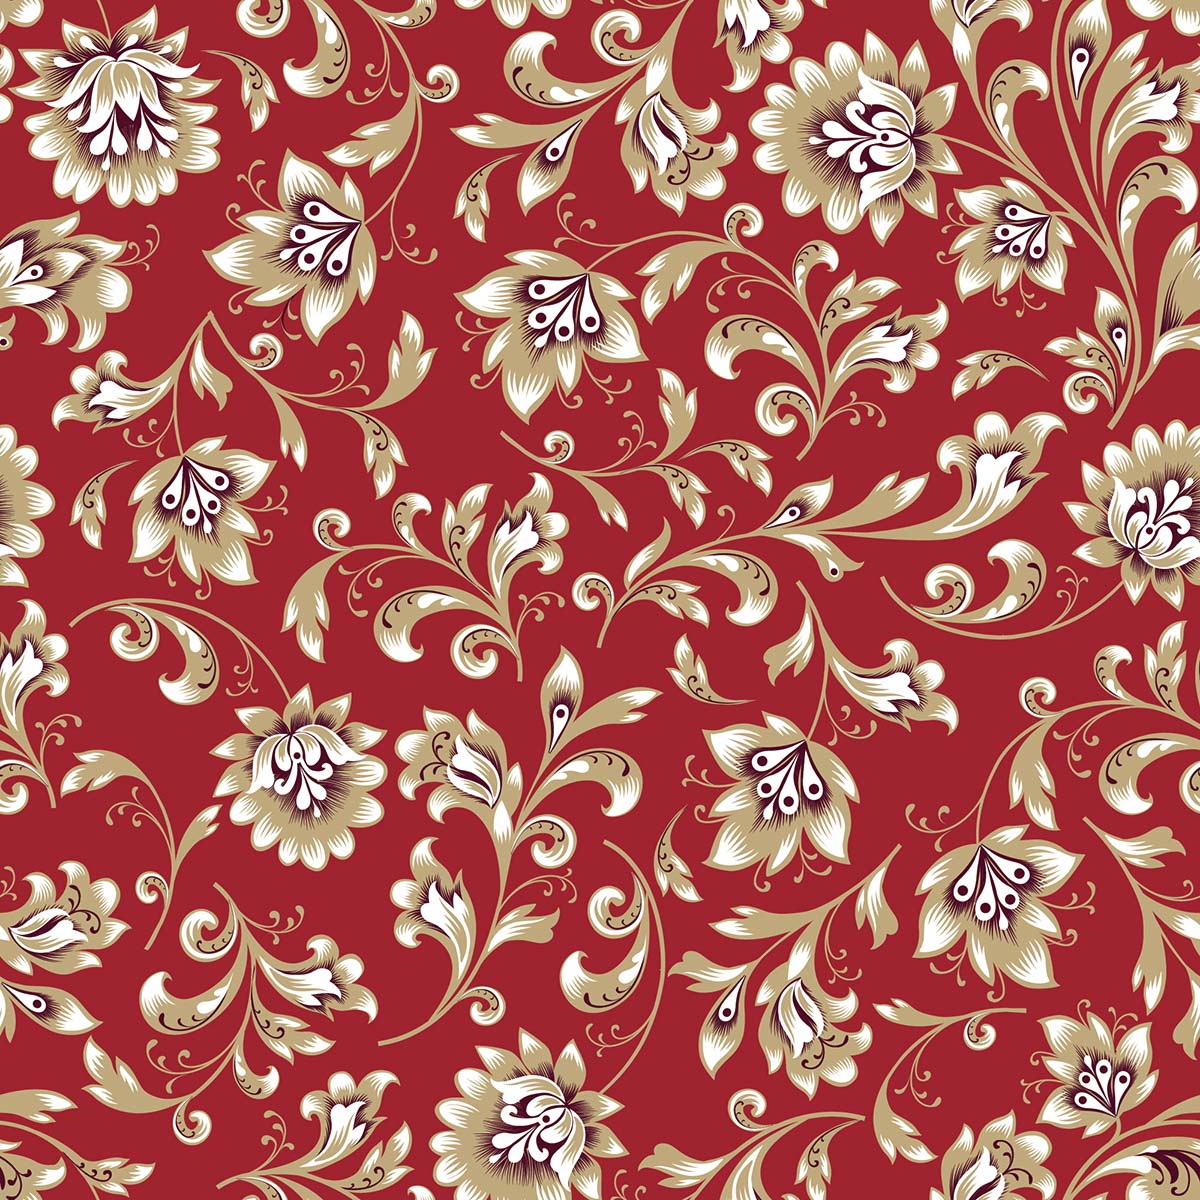 A red and gold floral pattern